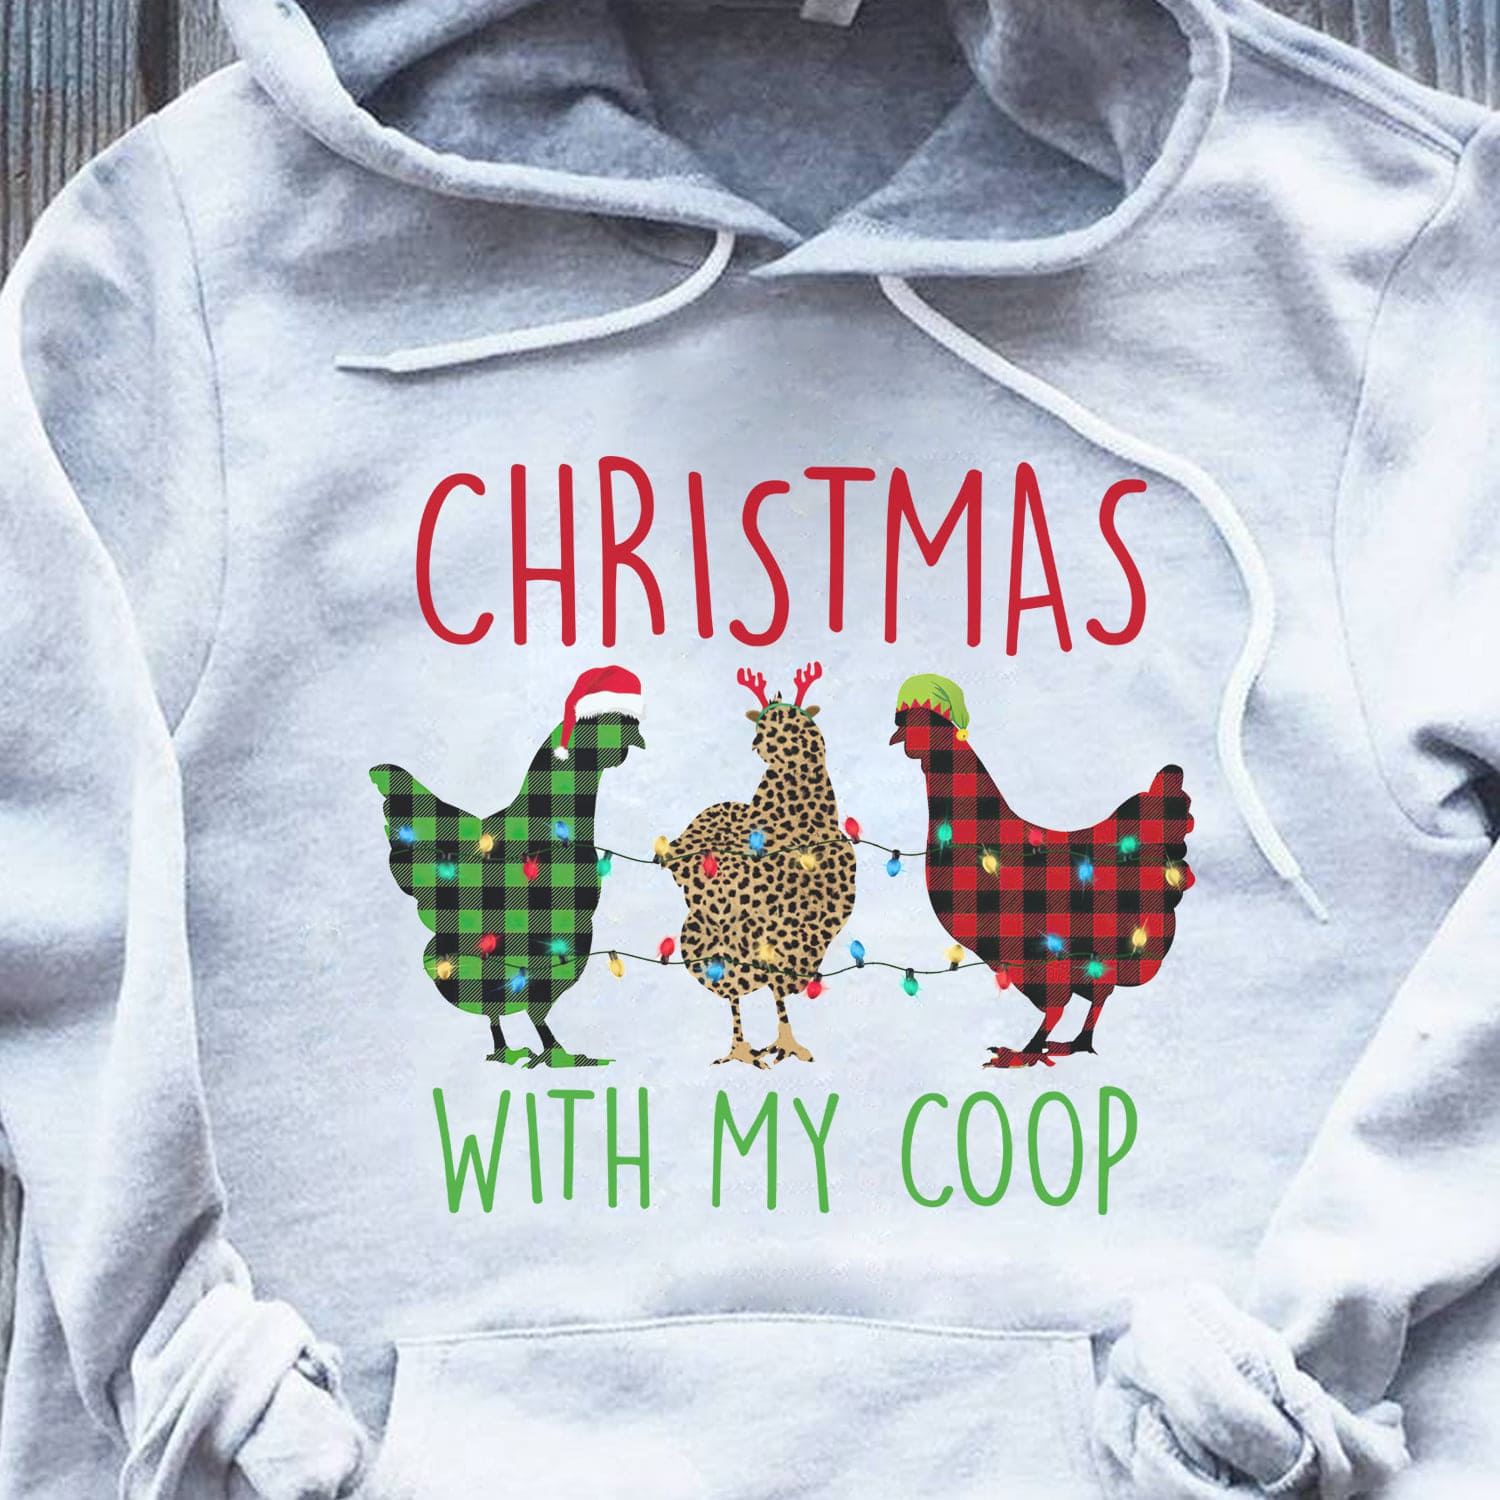 Christmas with my coop - Chicken Christmas decoration, Christmas ugly sweater